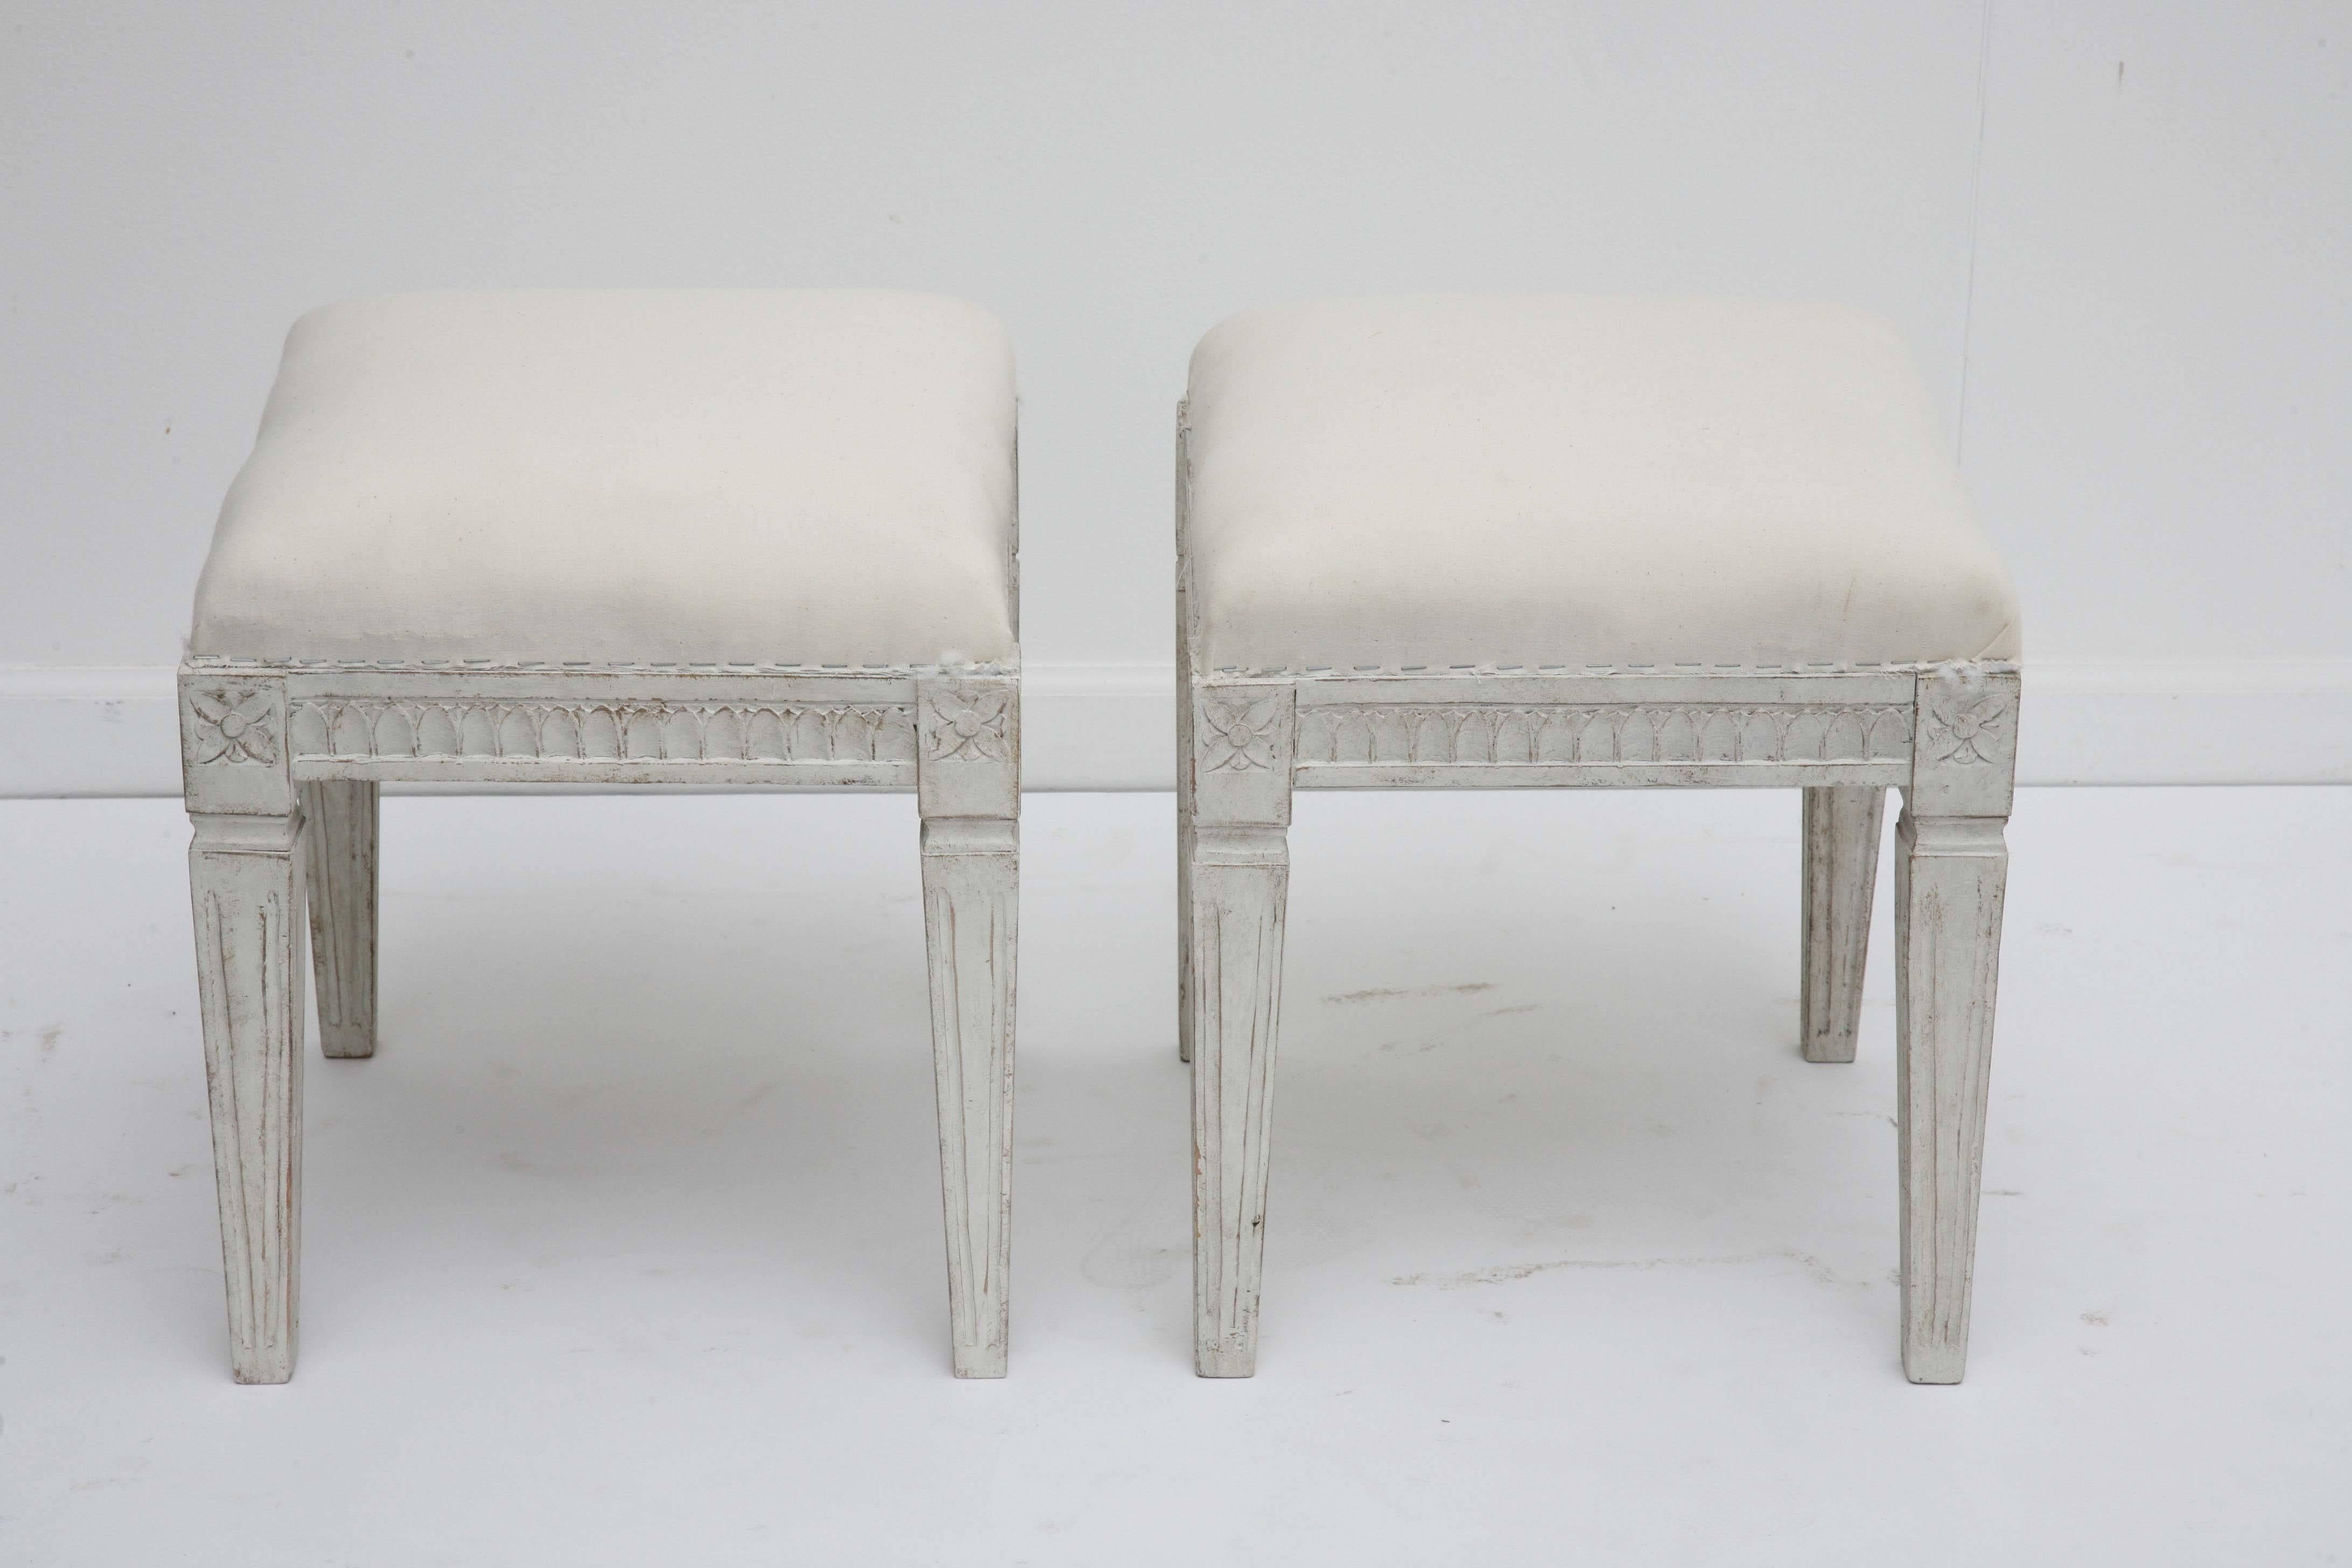 A pair of antique Swedish Gustavian painted stools, with carved lamb's tongue apron, square tapered legs with carved flower rosettes at top of each leg; they are painted in white-grayish distressed finish , curved upholstered tops.

19th